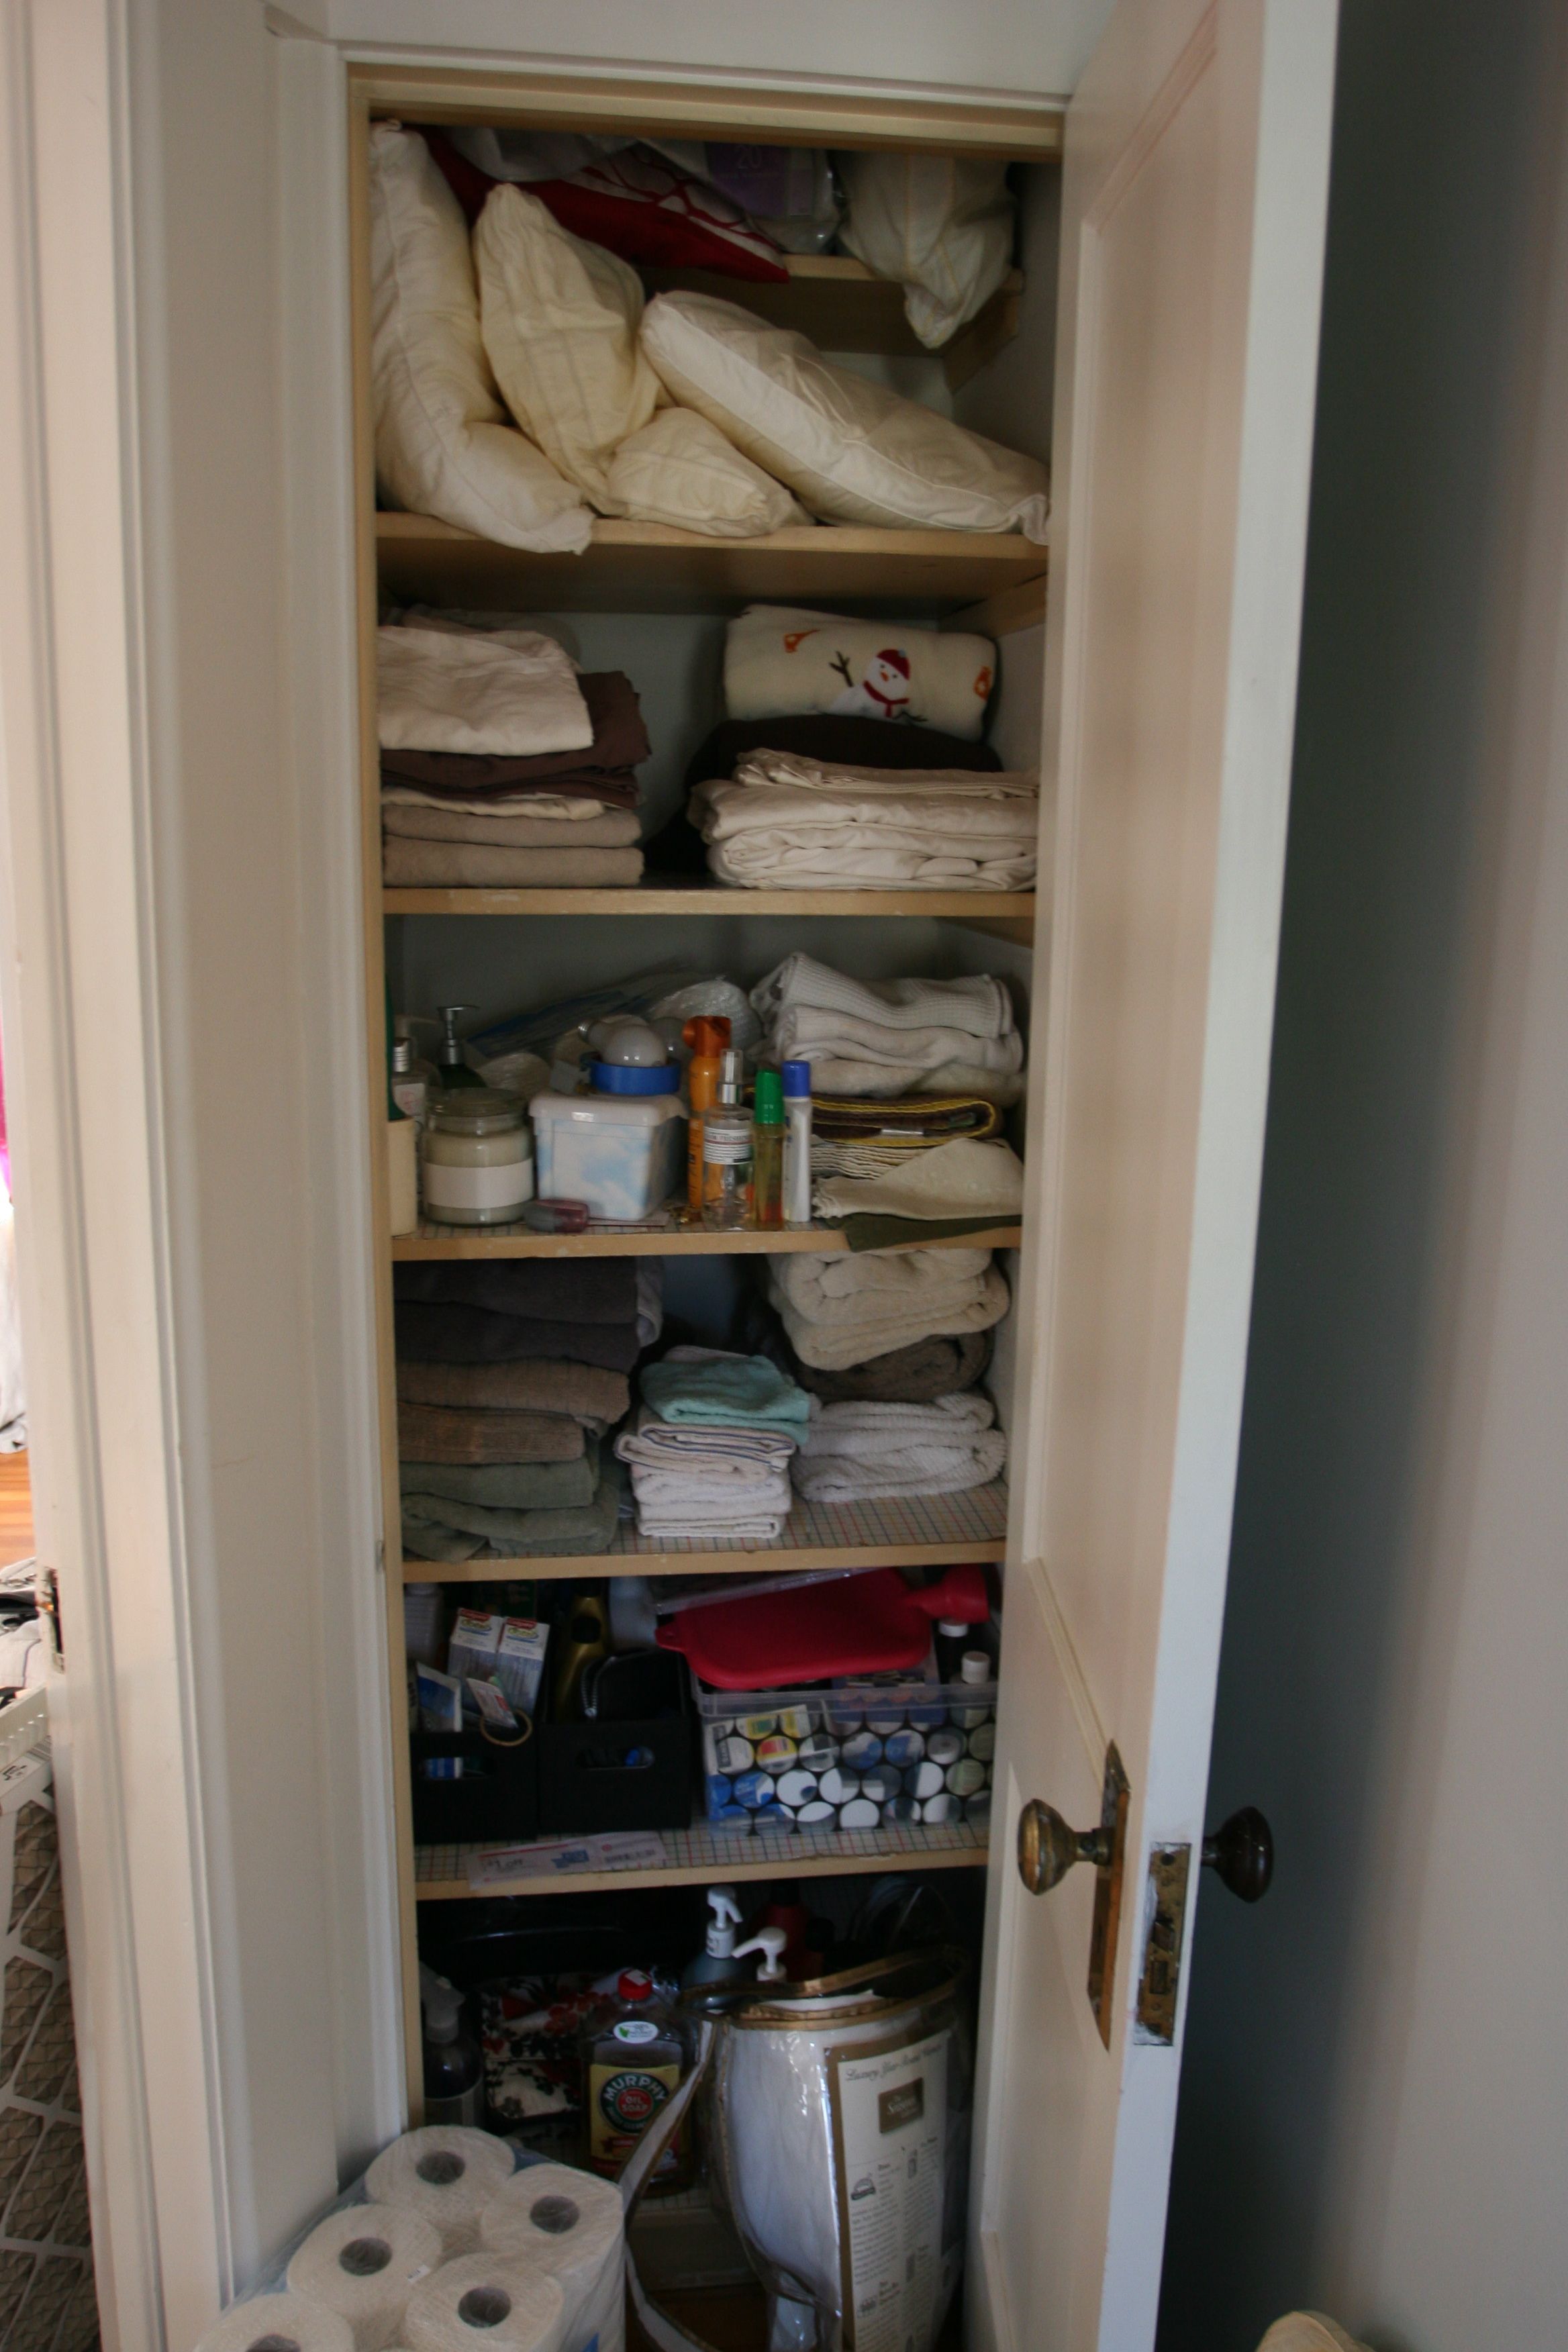 Our divine linen closet. Most of the closets haven't been sorted out after our summer of moving from room to room.